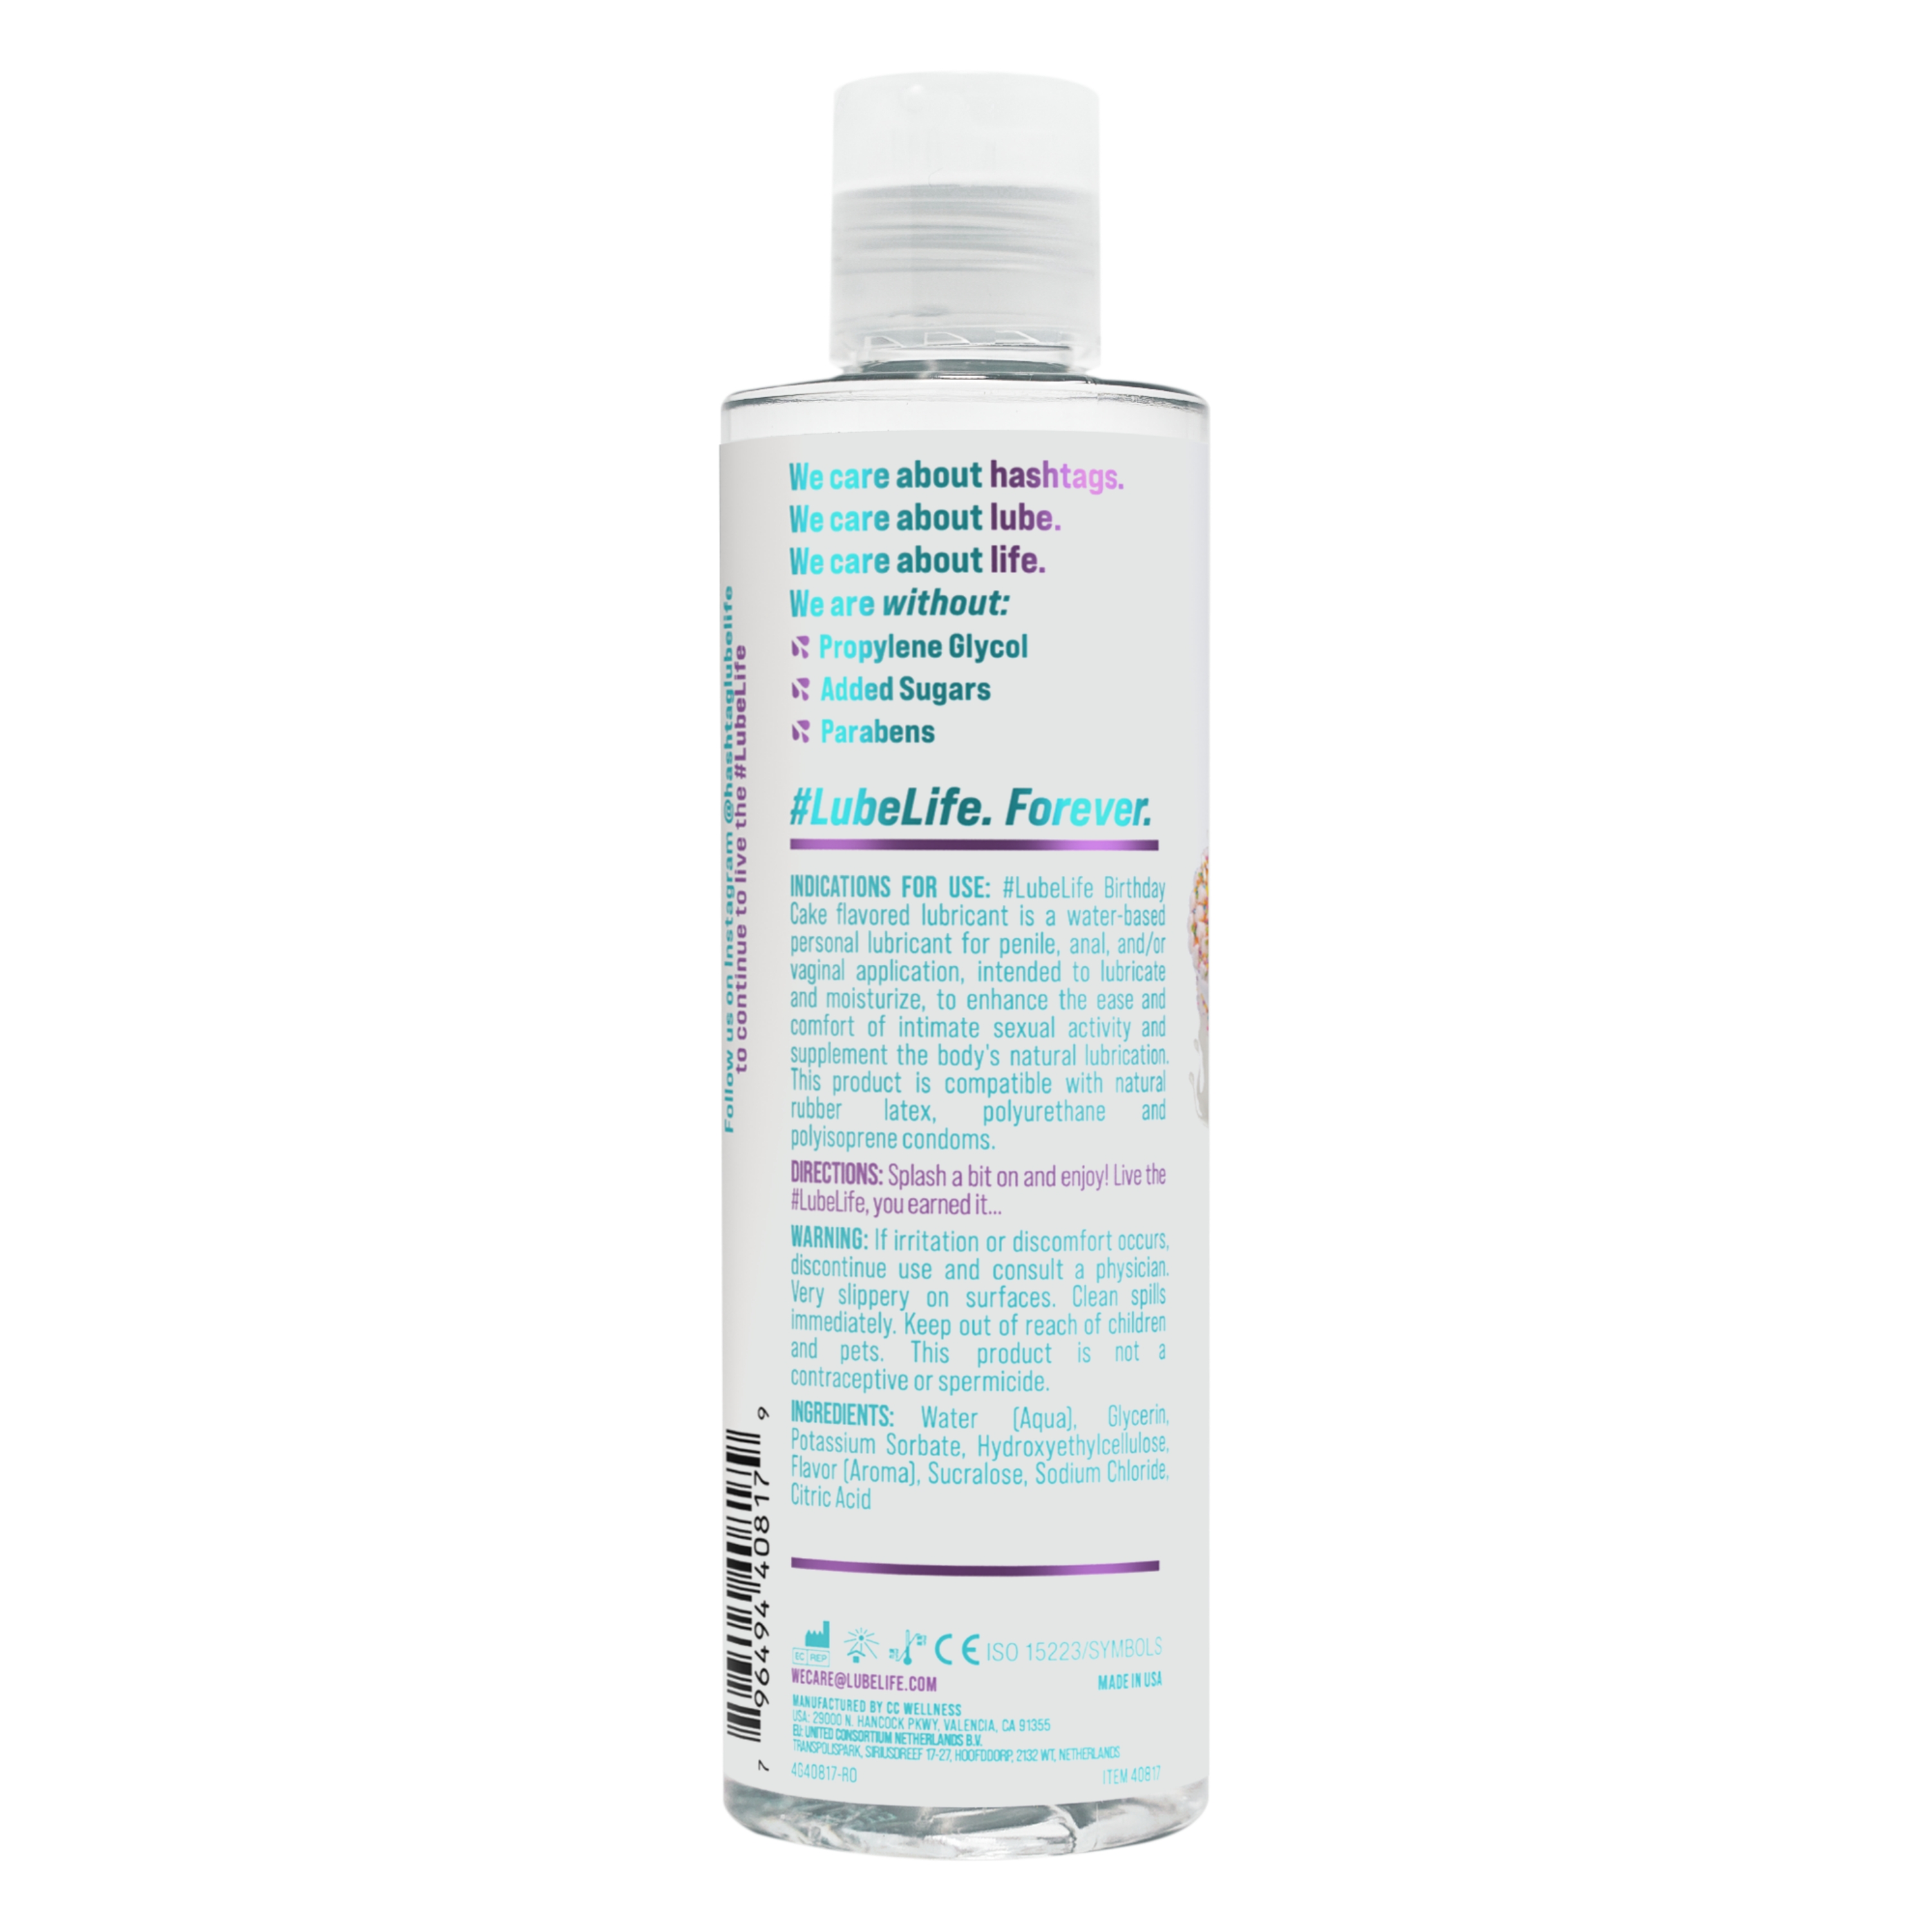 Lube Life Water-Based Birthday Cake Flavored Lubricant, 8 fl oz - image 2 of 5